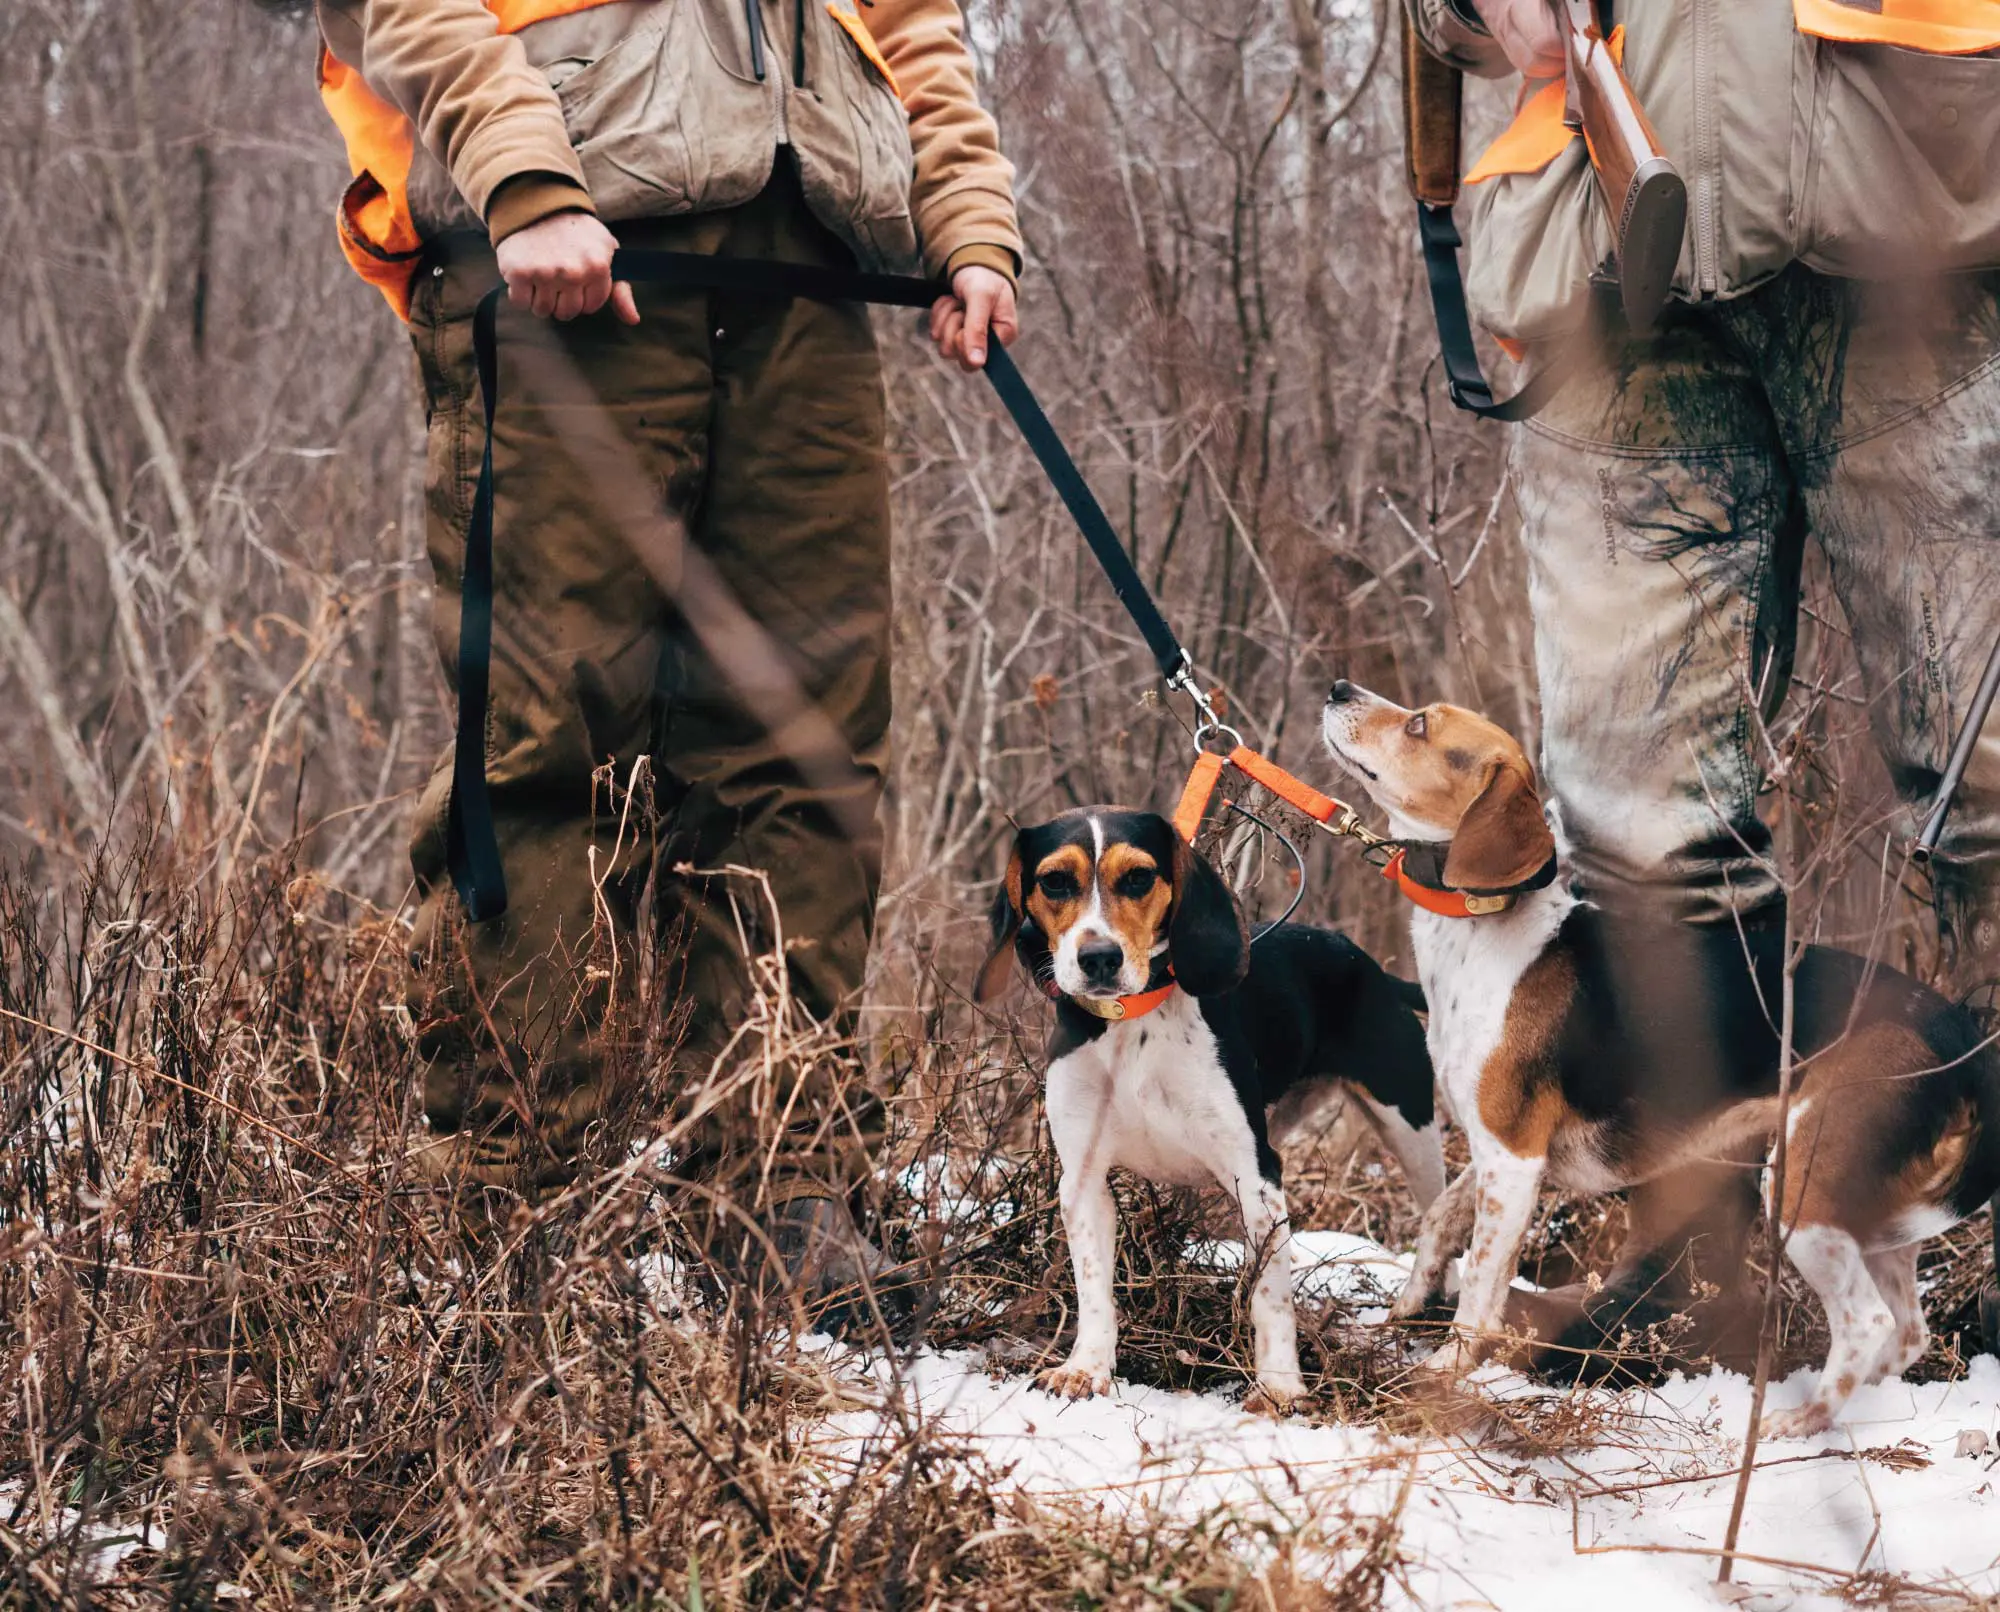 Rabbit Hunting Video with Beagles - Hunting Dog Confidential